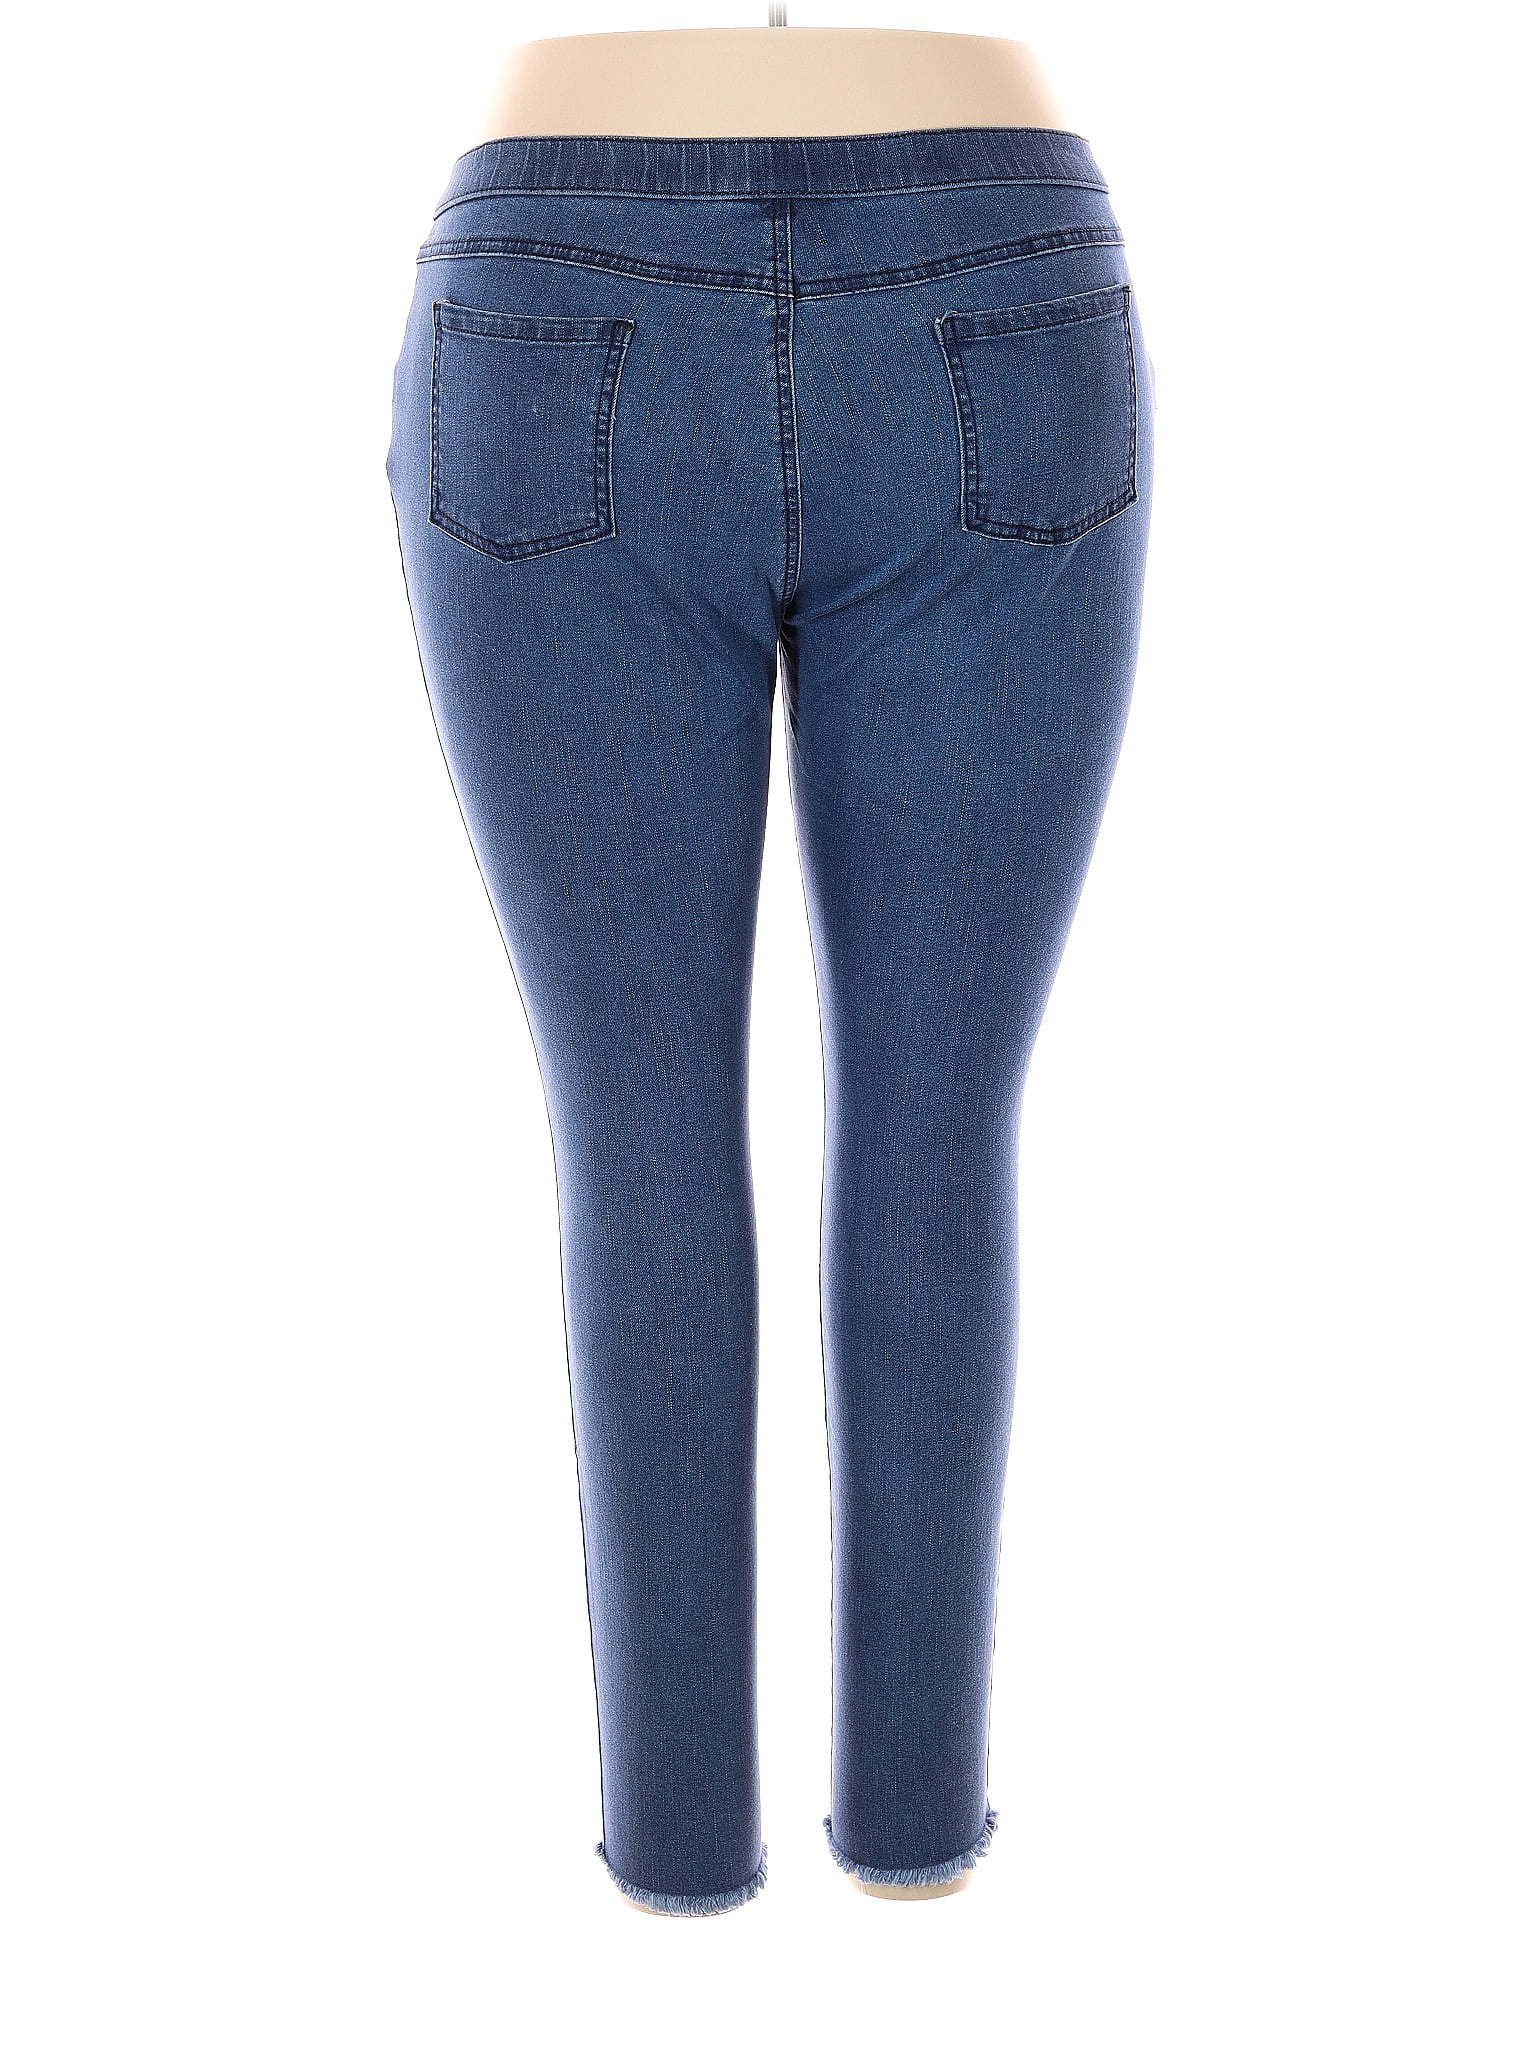 No Nonsense Solid Blue Jeggings Size XXL - 26% off